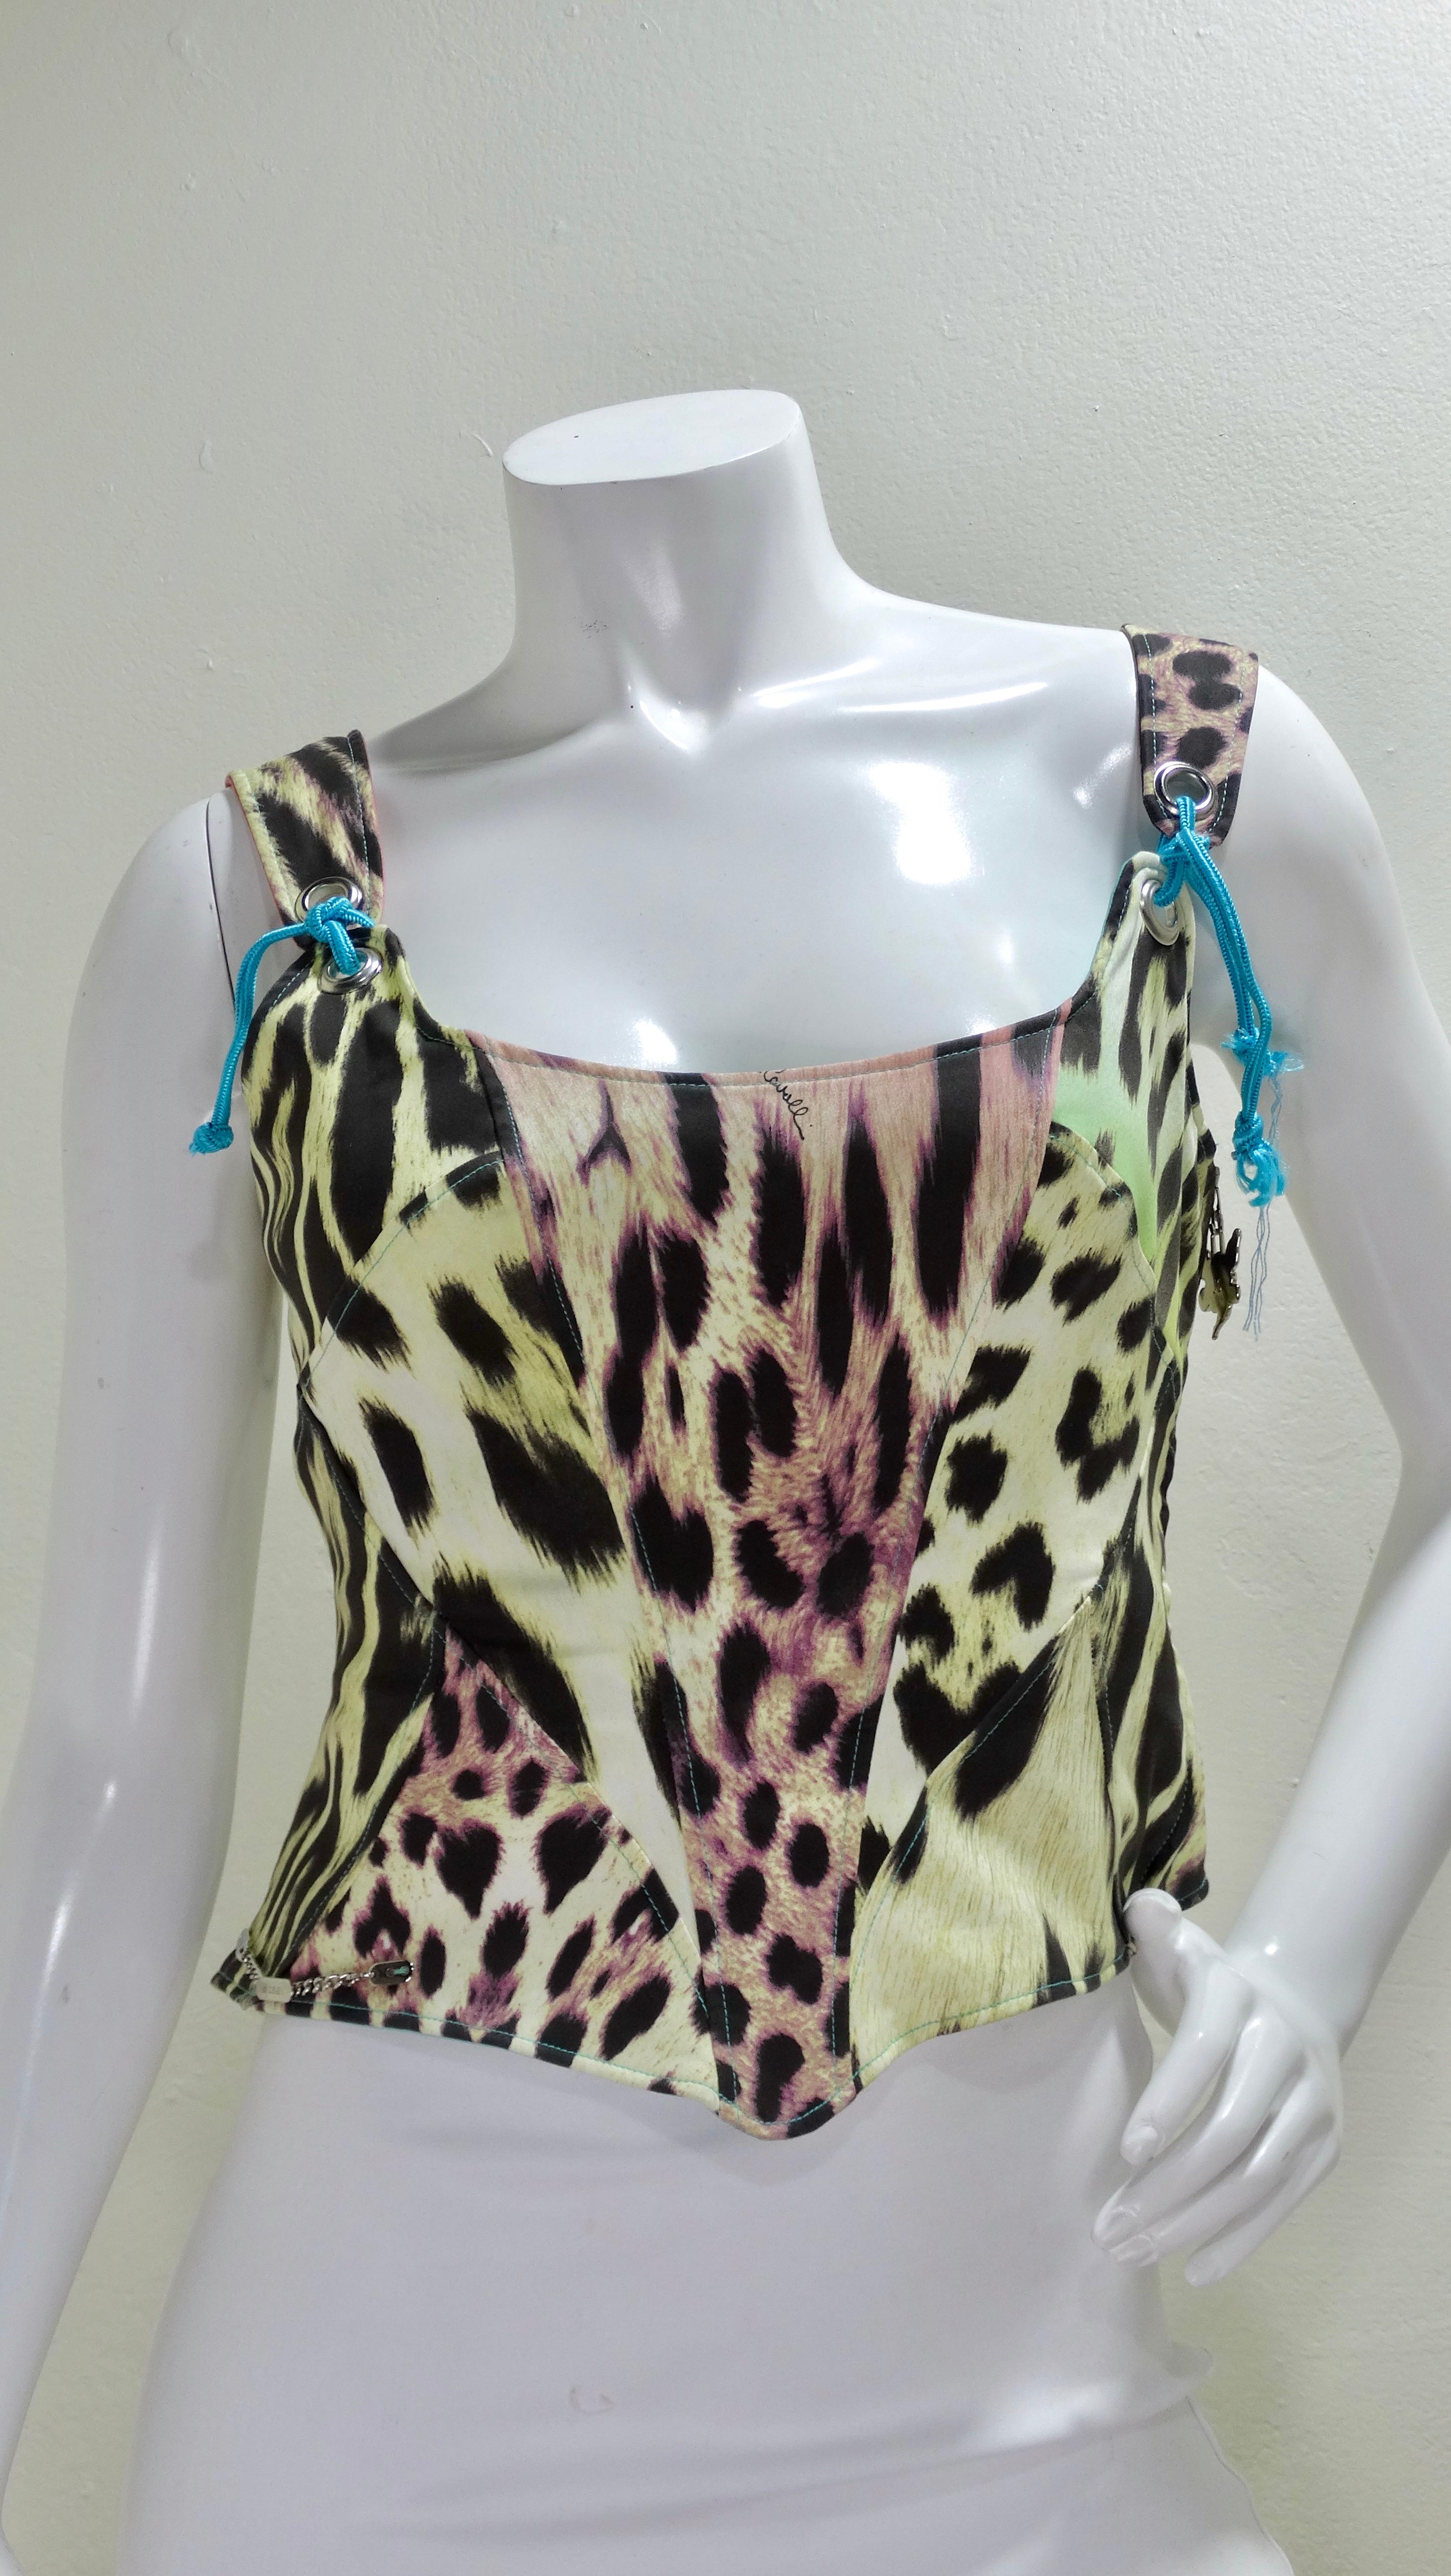 Bring out your edgy side with this Just Cavalli multicolor mixed animal print bustier top. This top's fit is almost completely customizable as it features a lace up back, adjustable shoulder ties, soft boning, as well as a full zipper side. Don't